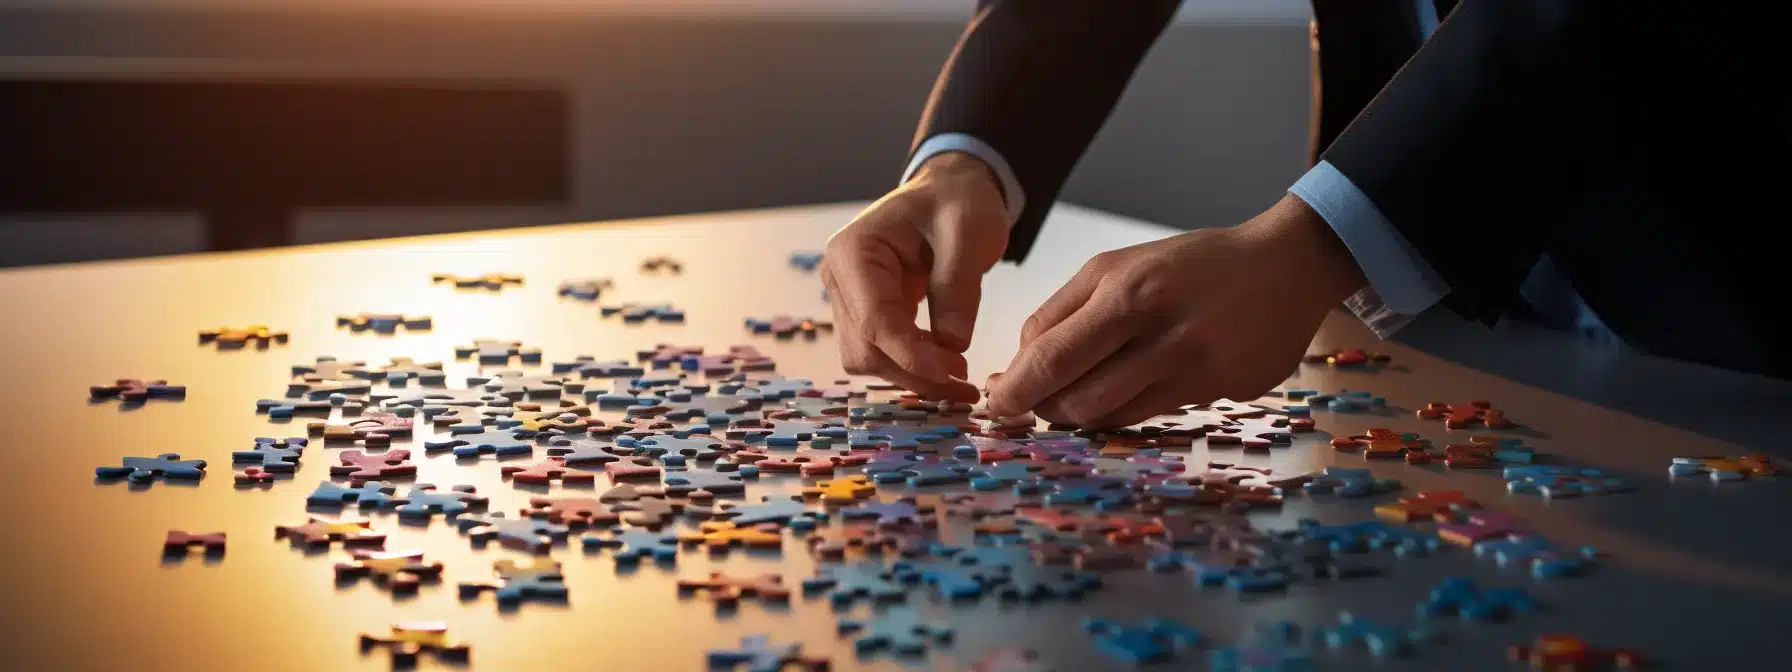 A Brand Manager Carefully Placing Puzzle Pieces Together To Create A Cohesive Brand Identity.